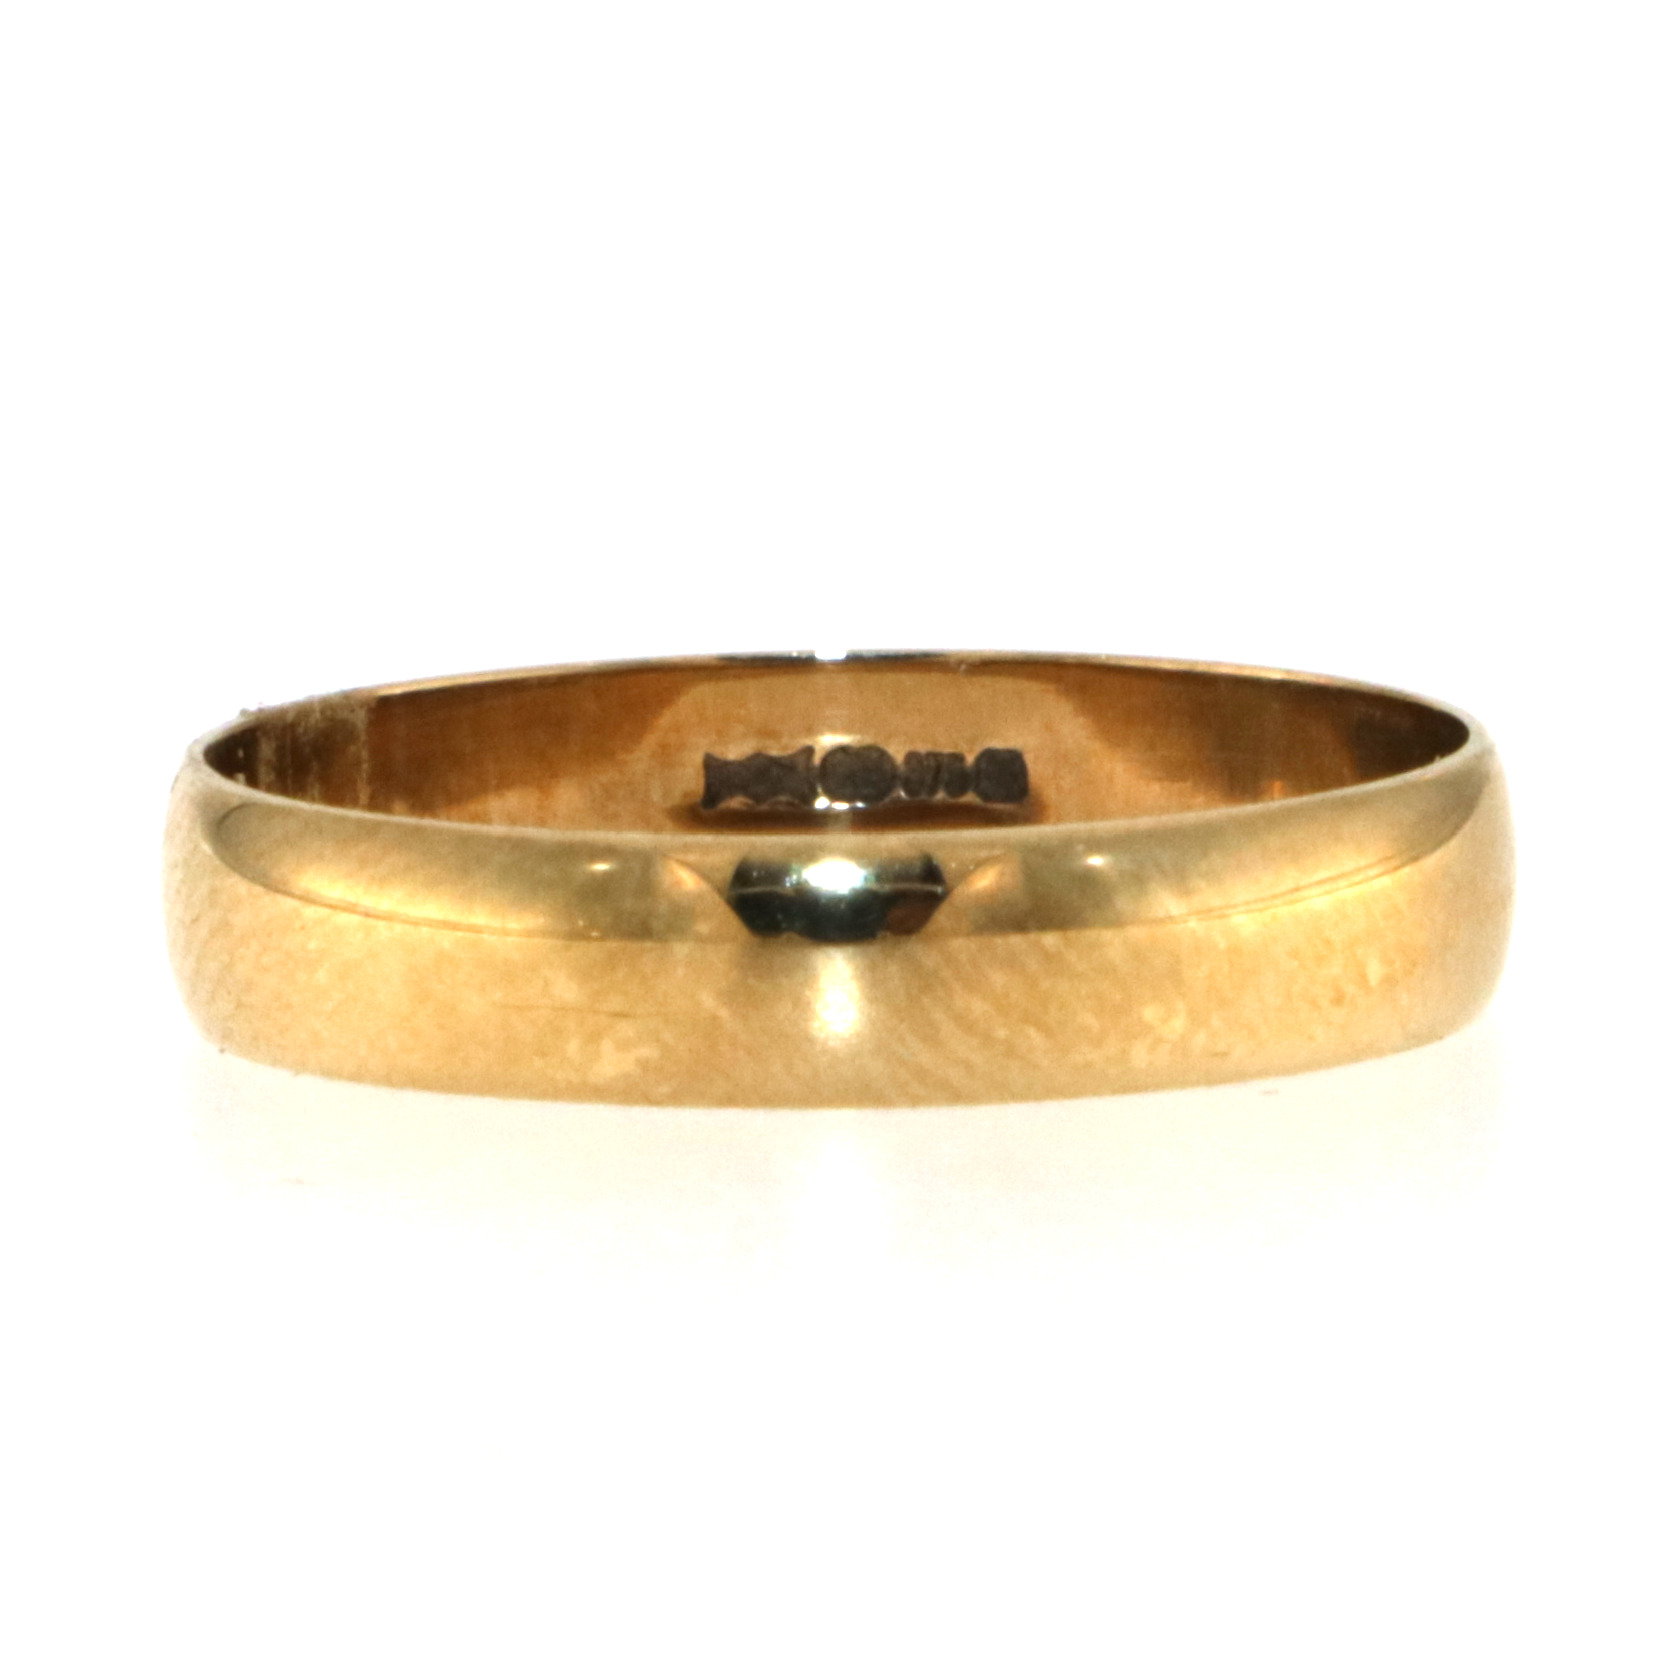 English Wedding Band (Pre-Owned)